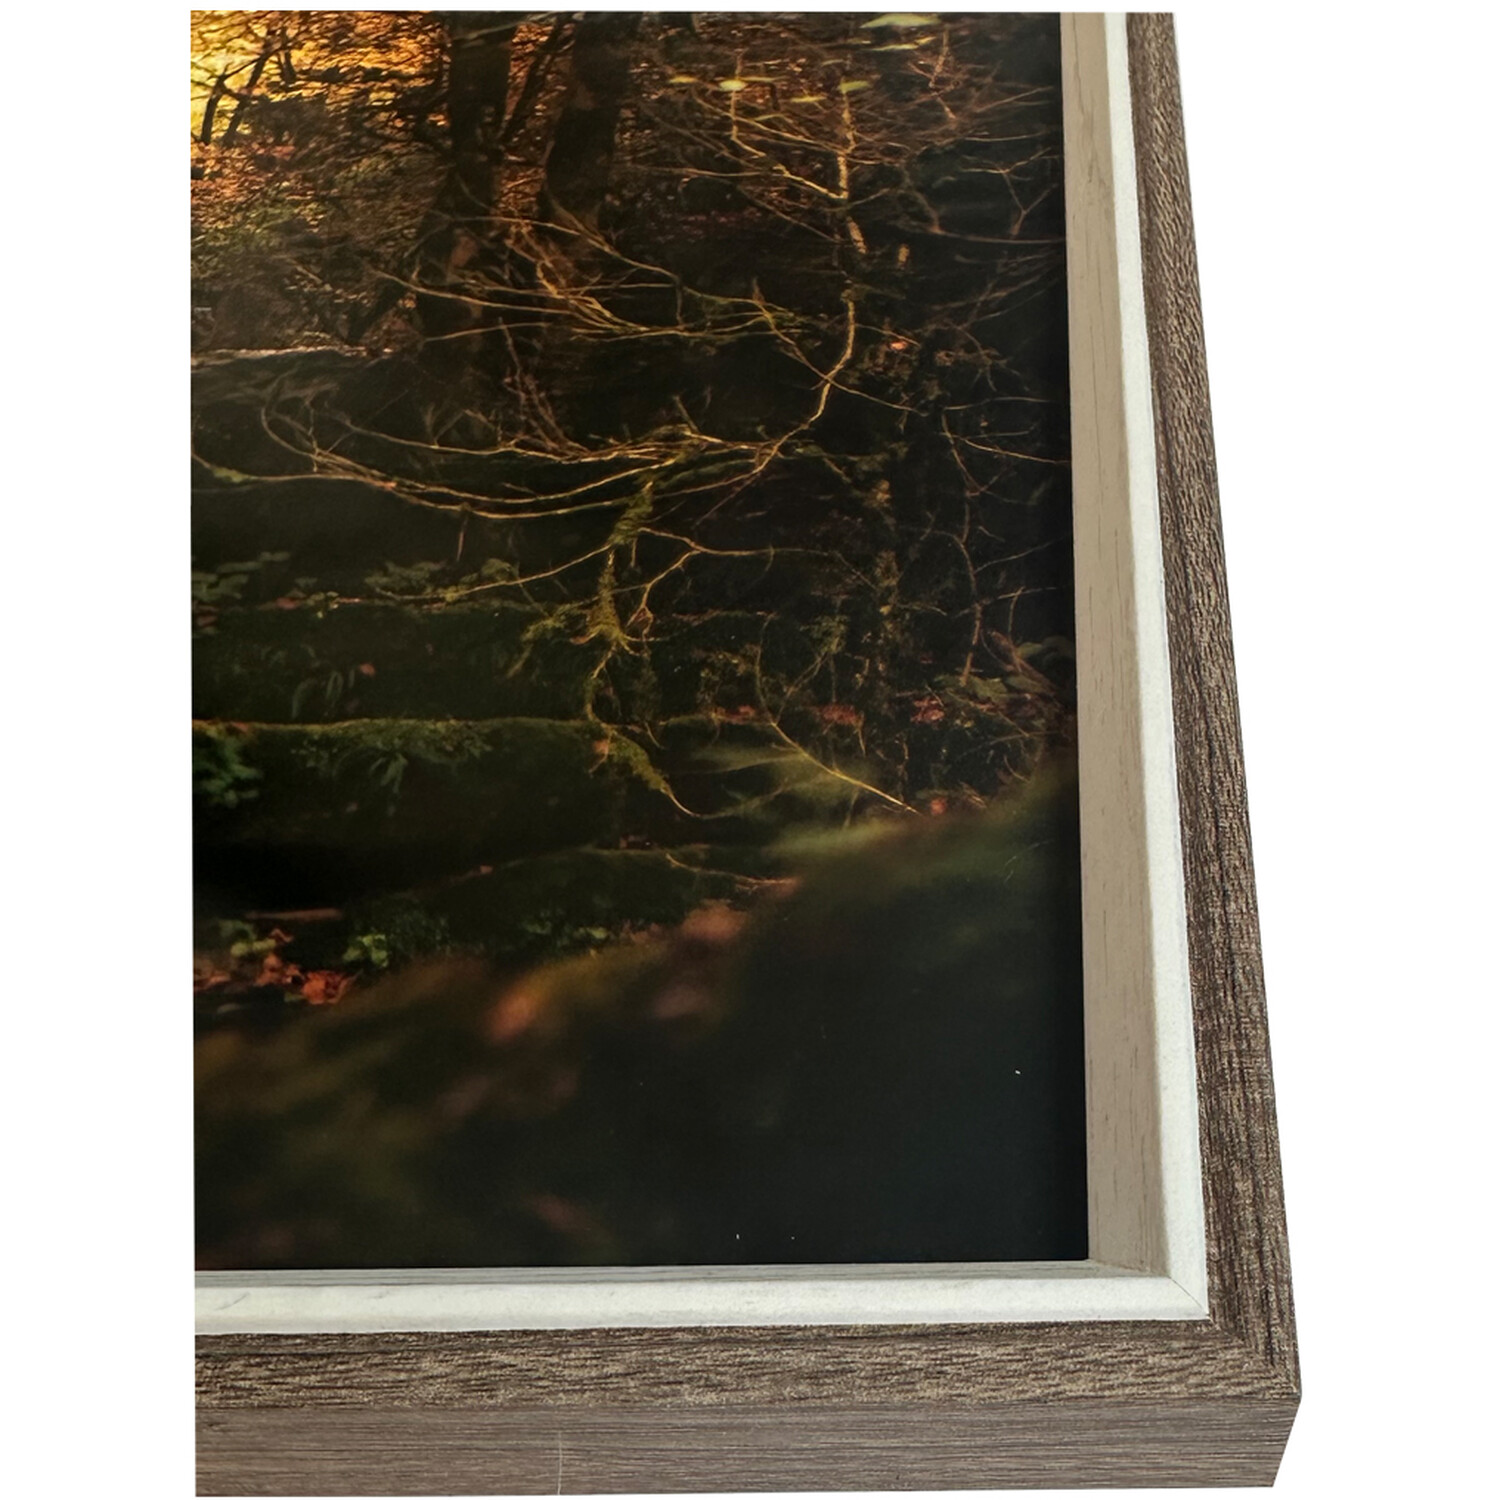 Zoey Rustic Wood Effect Frame - Brown / 12x10in Image 3